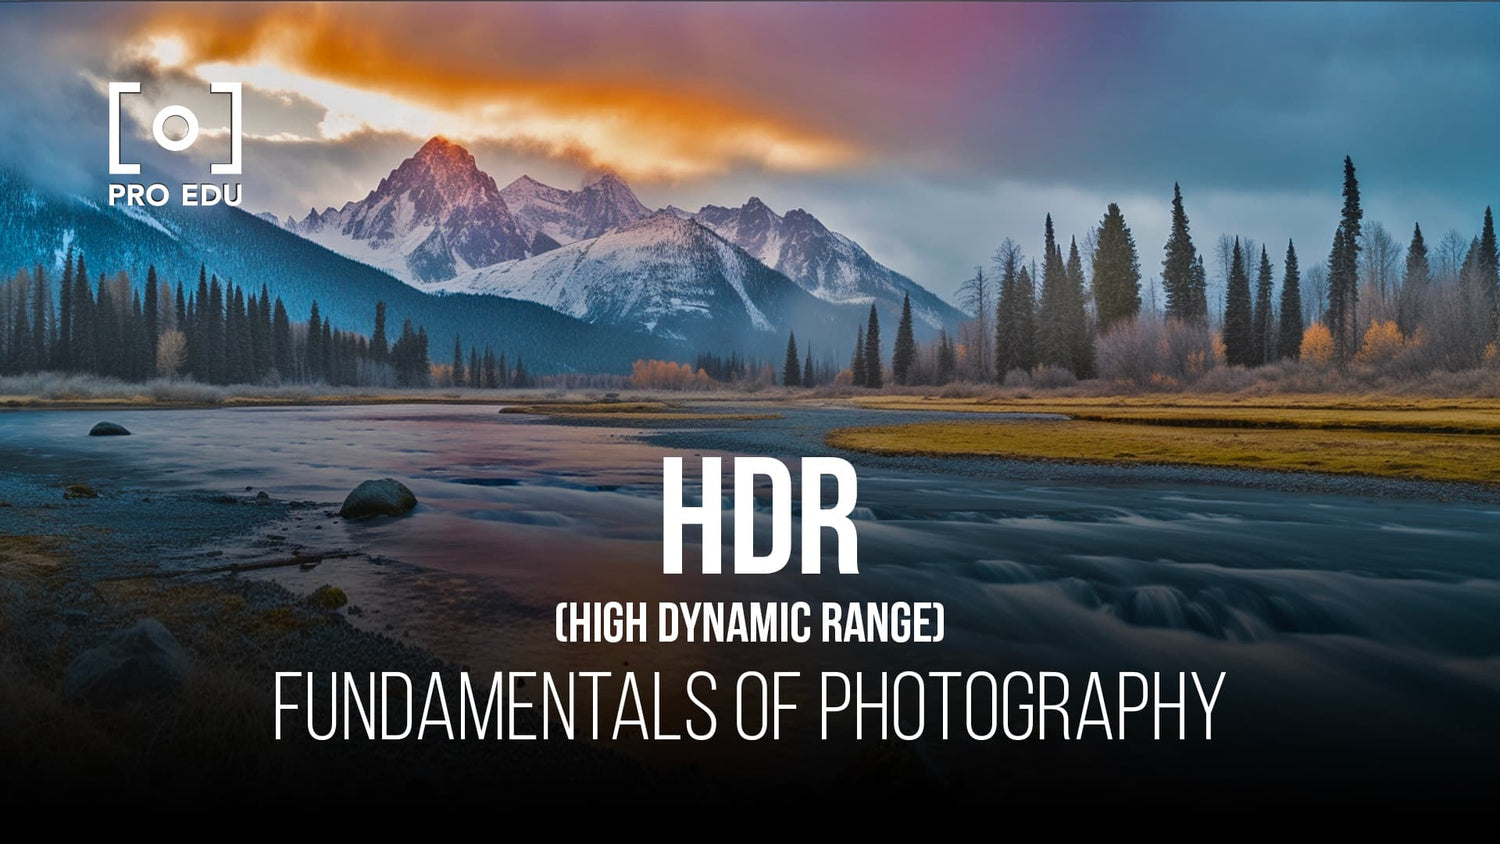 Introductory guide to high dynamic range (HDR) photography for beginners